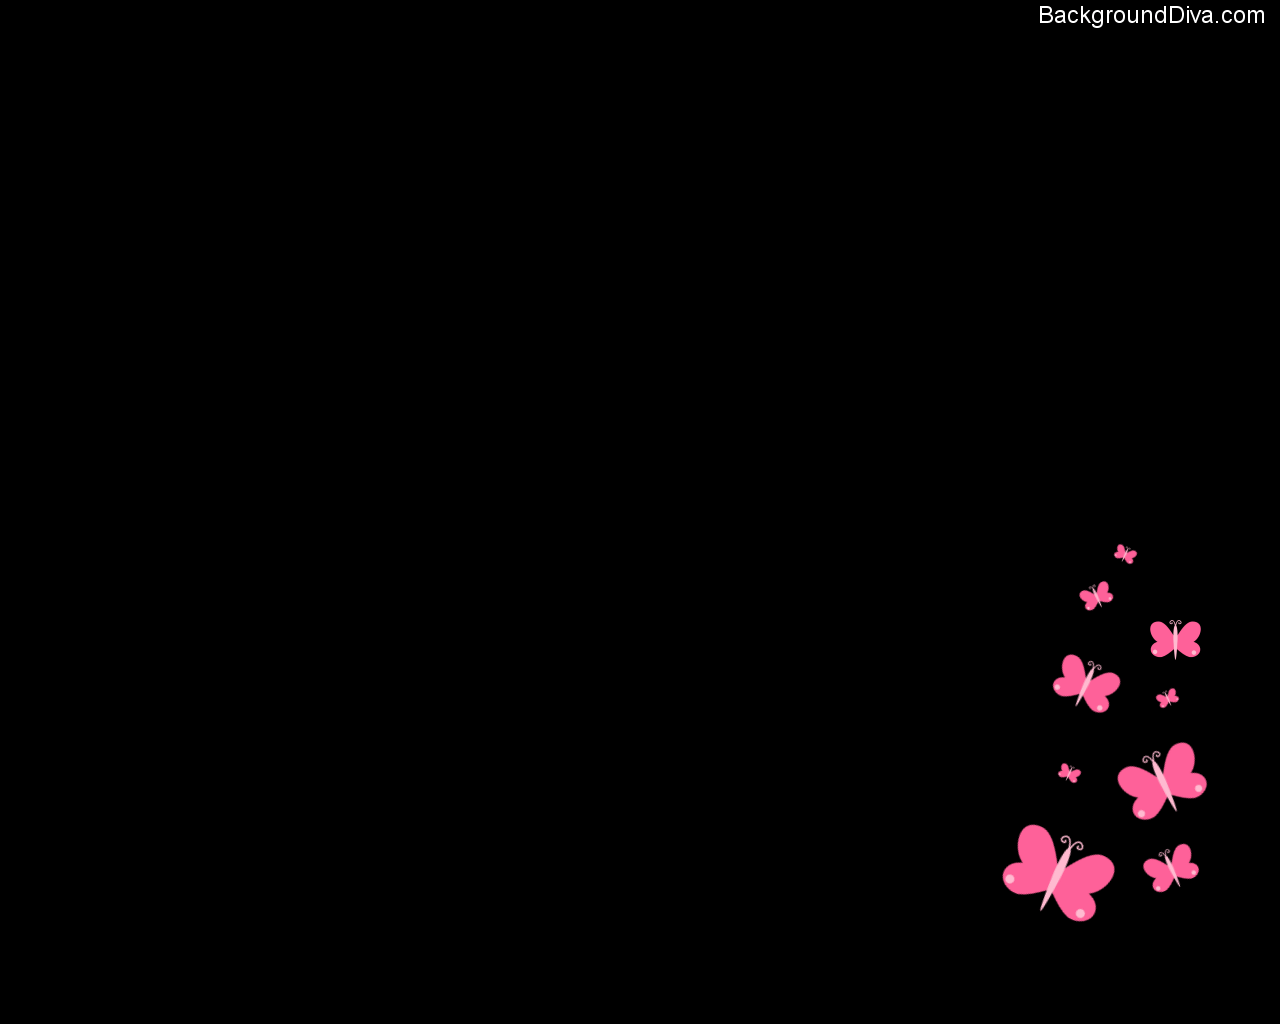 Black and Pink Butterfly Wallpaper. WALLPAPERS 16:):)